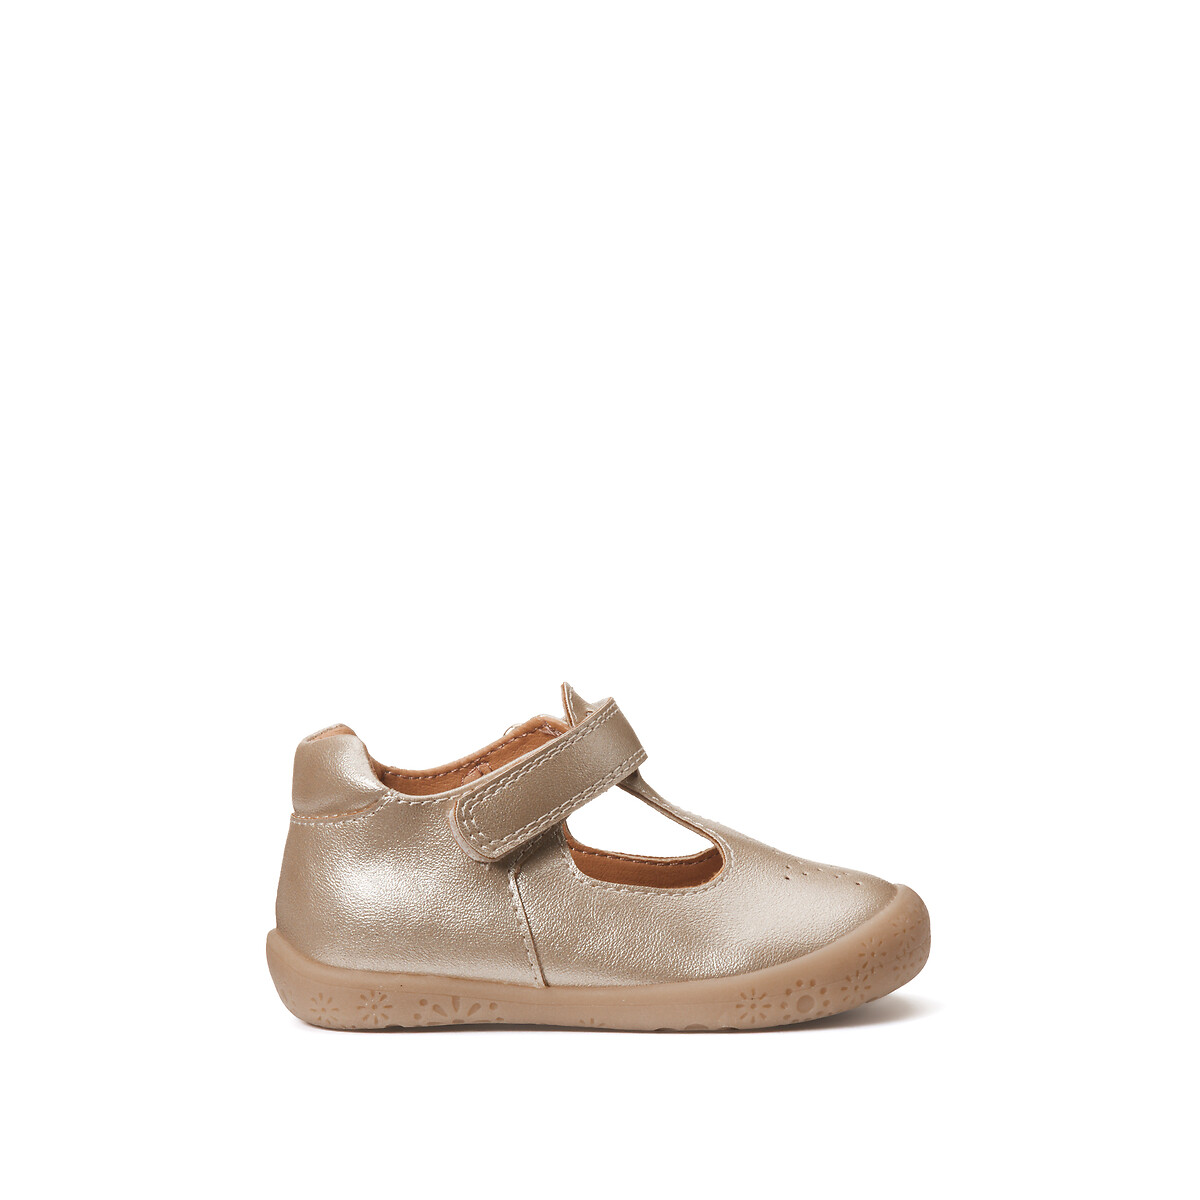 Kids Ballet Pumps with Touch ’n’ Close Fastening